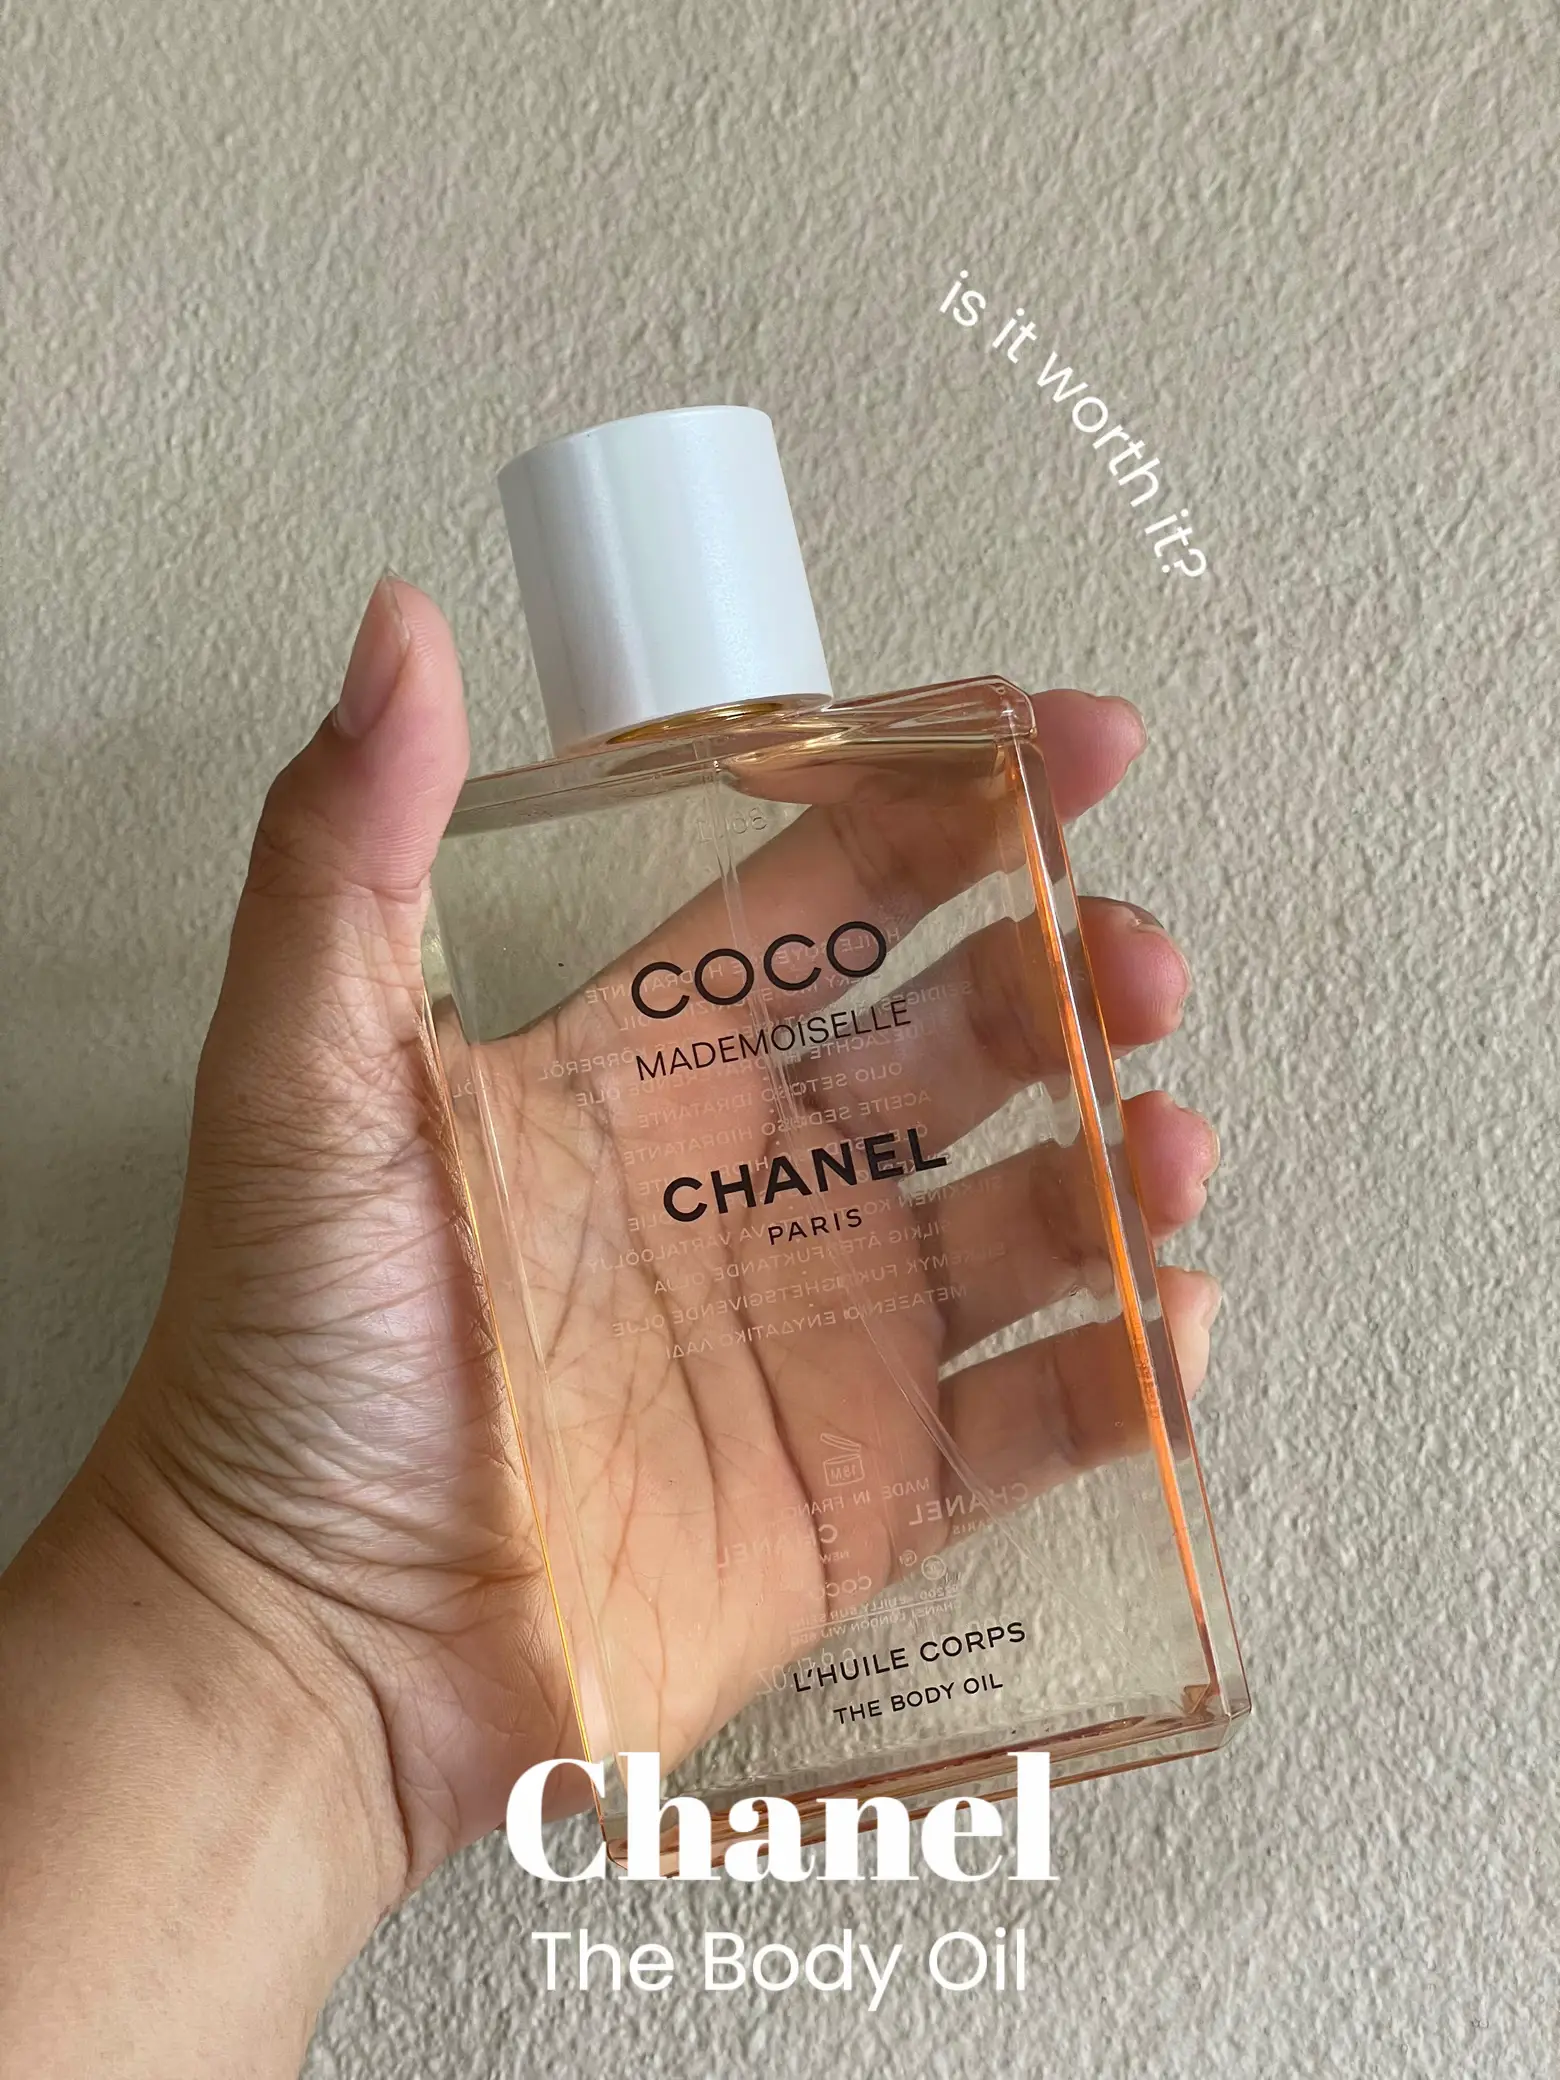 Chanel Body Oil Worth to buy? 🧐, Gallery posted by Nur Nabilla